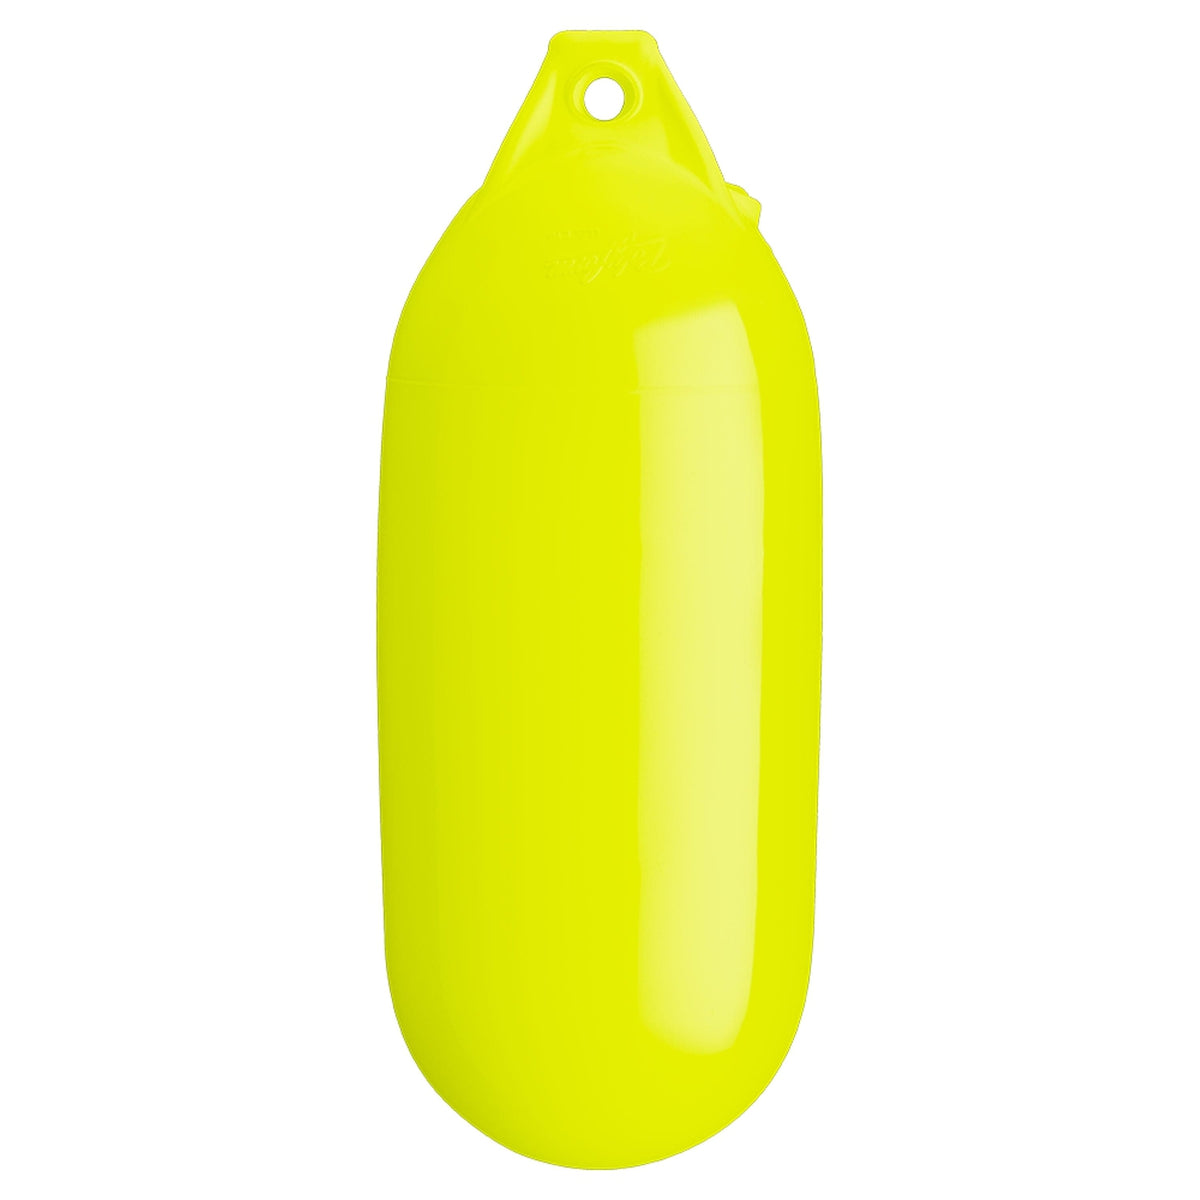 Polyform U.S. Qualifies for Free Shipping Polyform S-1 S-Series Buoy 6" x 15" Saturn Yellow #S-1-SATURN-YELLOW